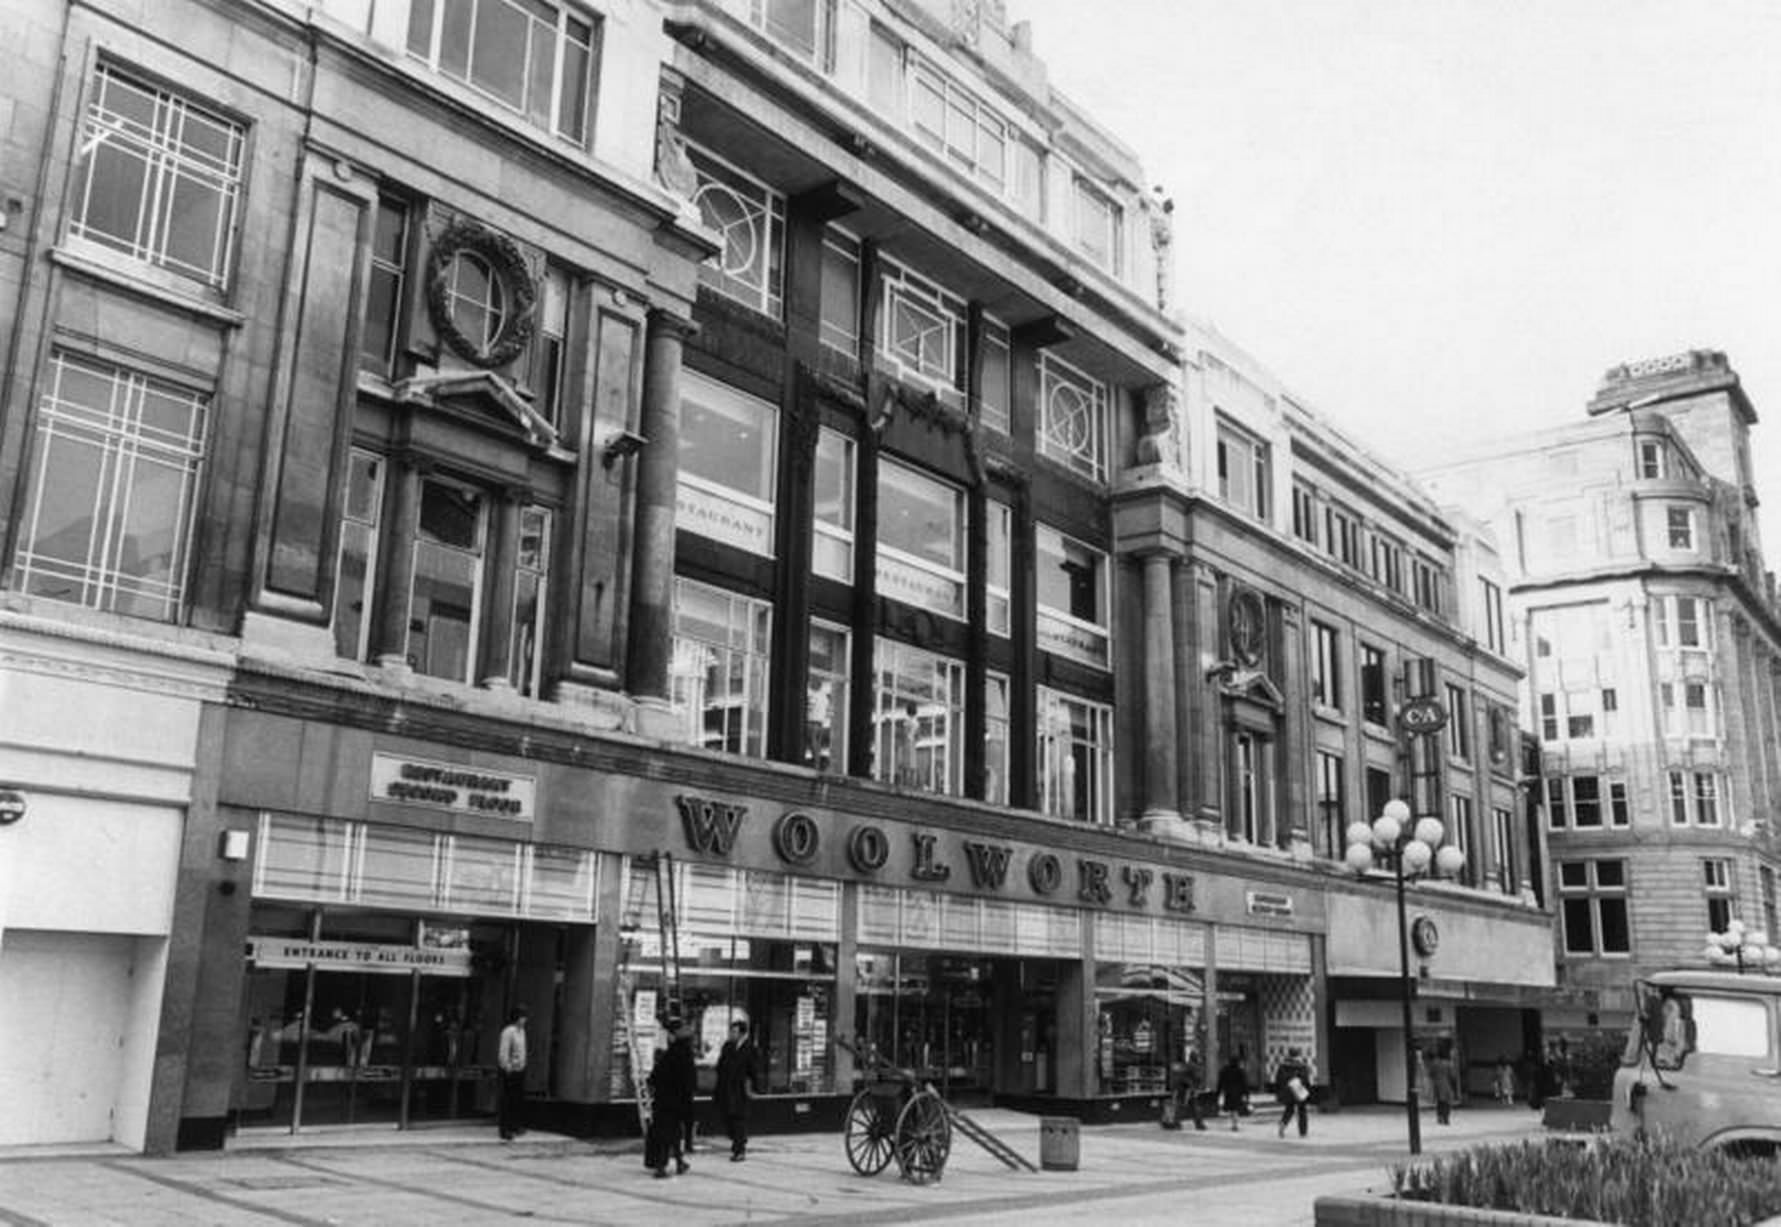 F W Woolworth Department Store, Liverpool, 11th March 1982.